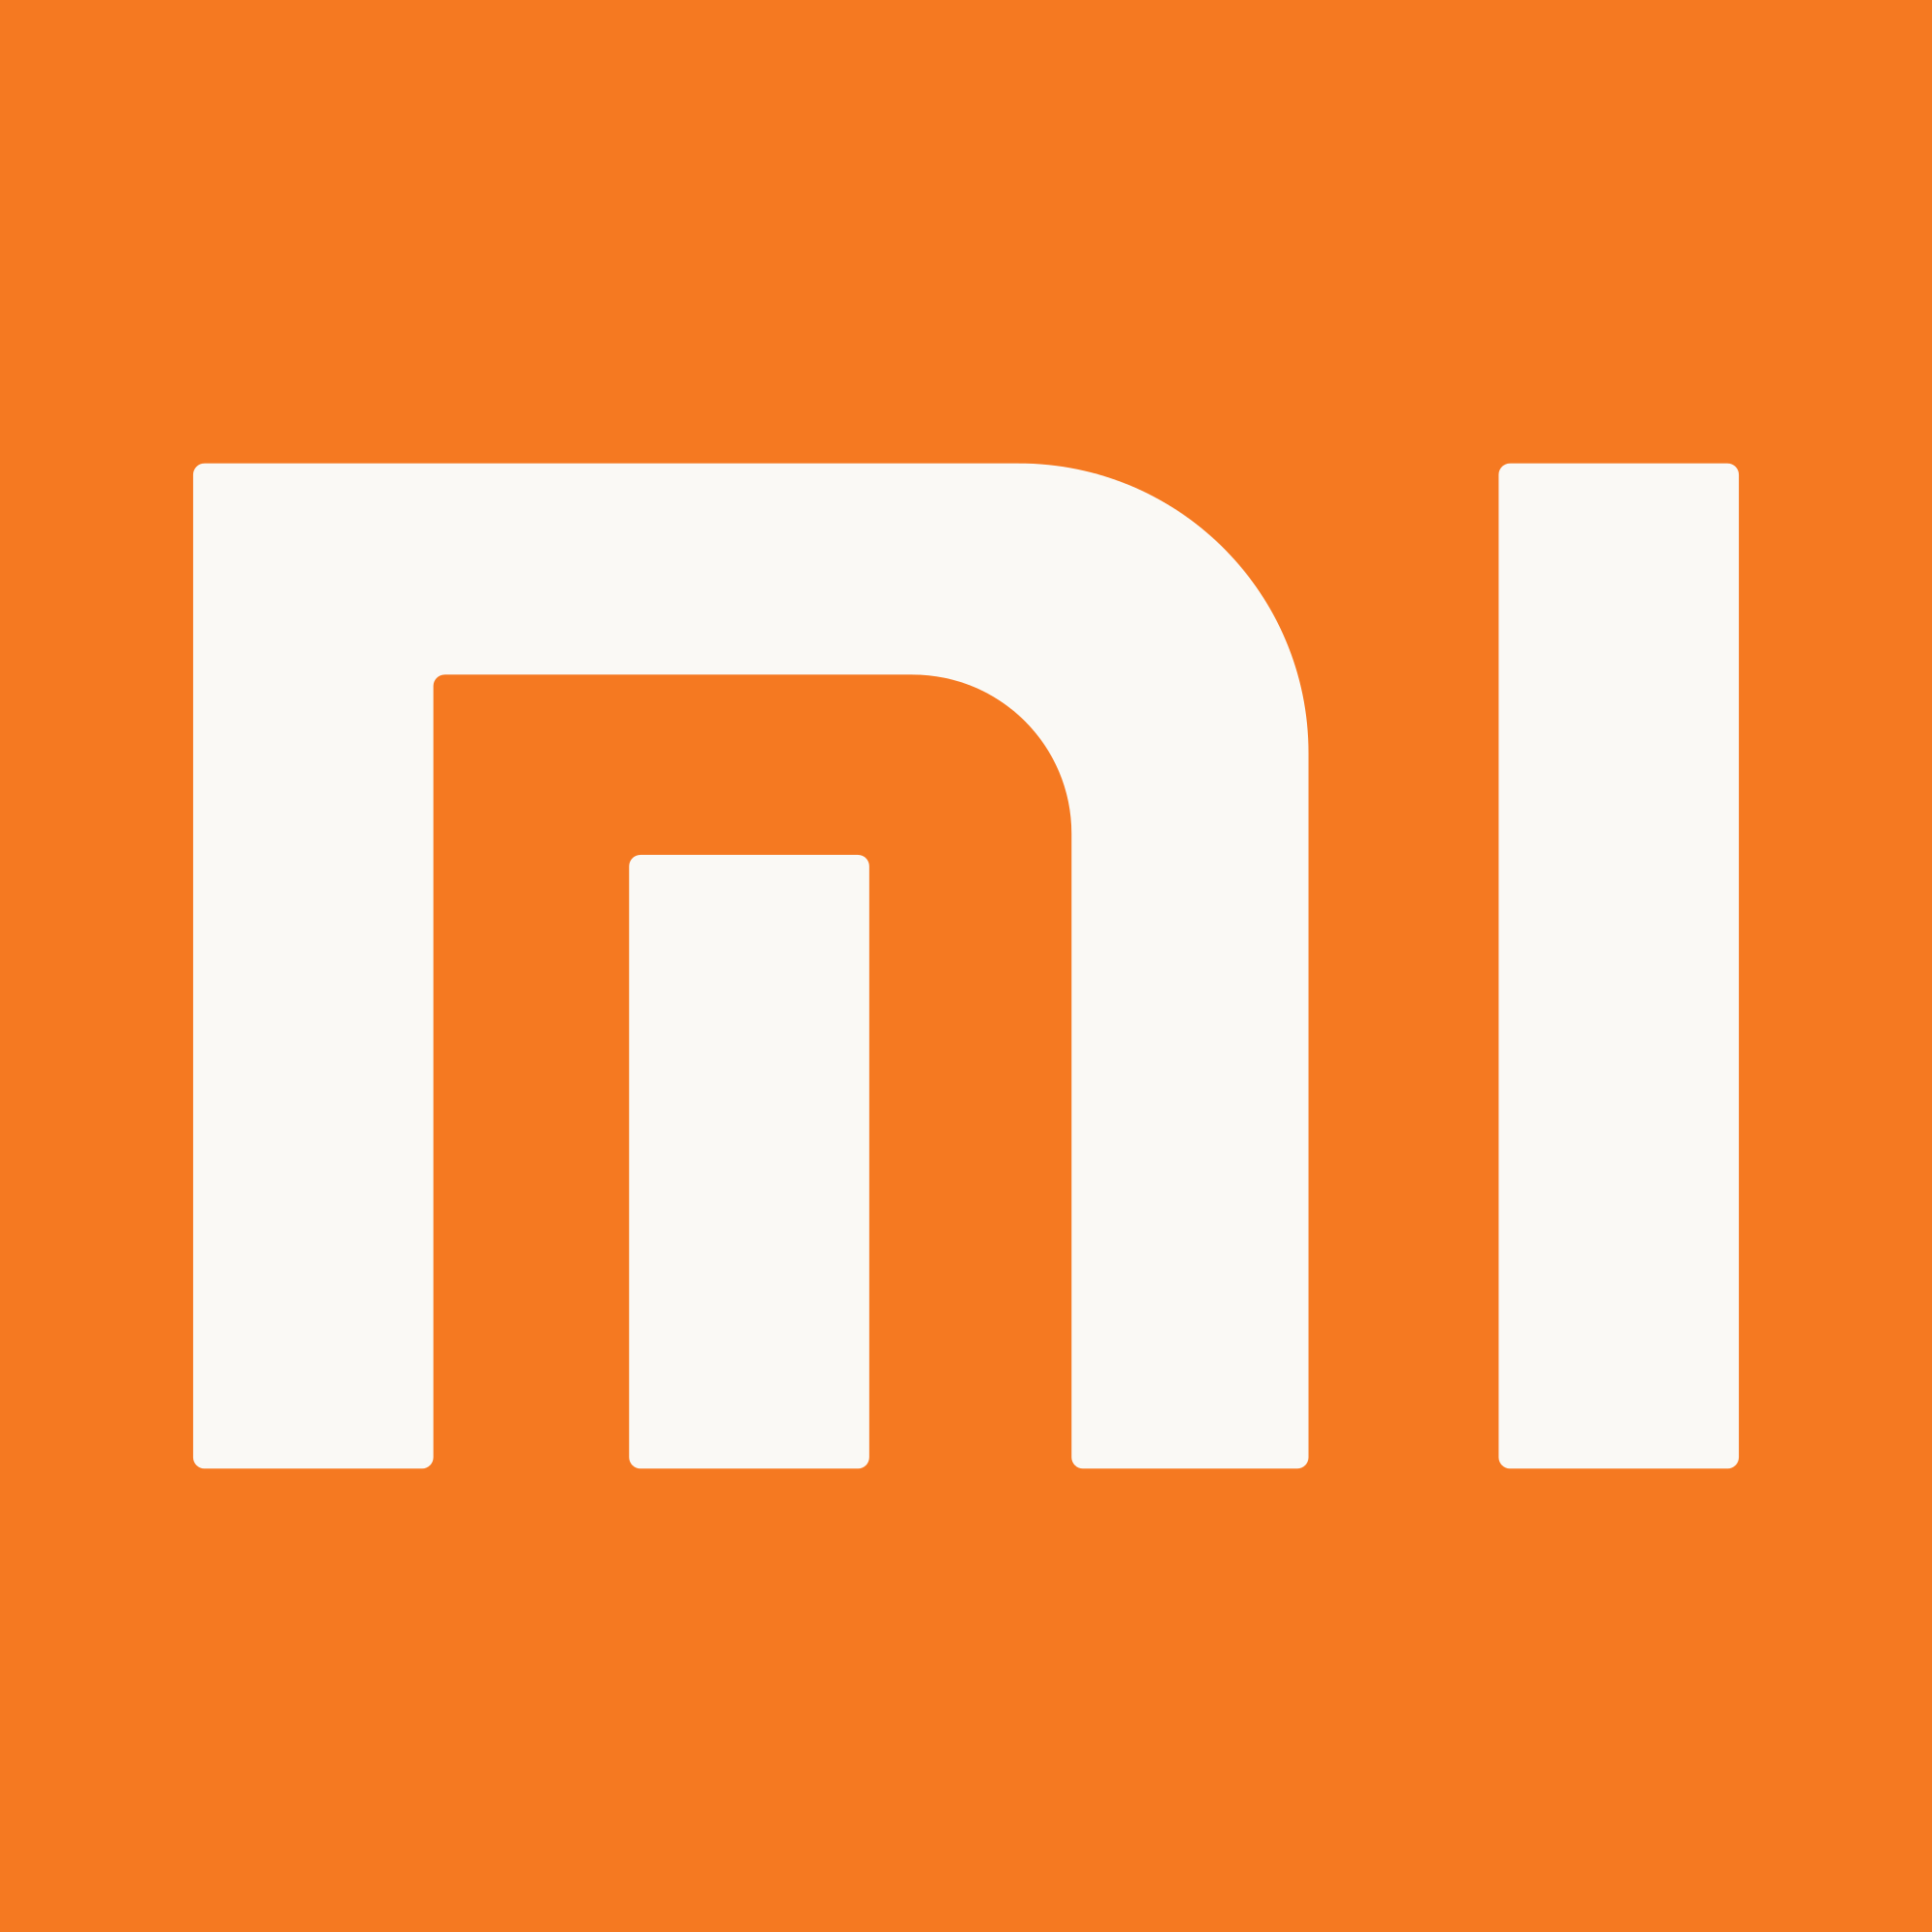 Trajectory Announces Major Agreements With Xiaomi – the Leading Chinese